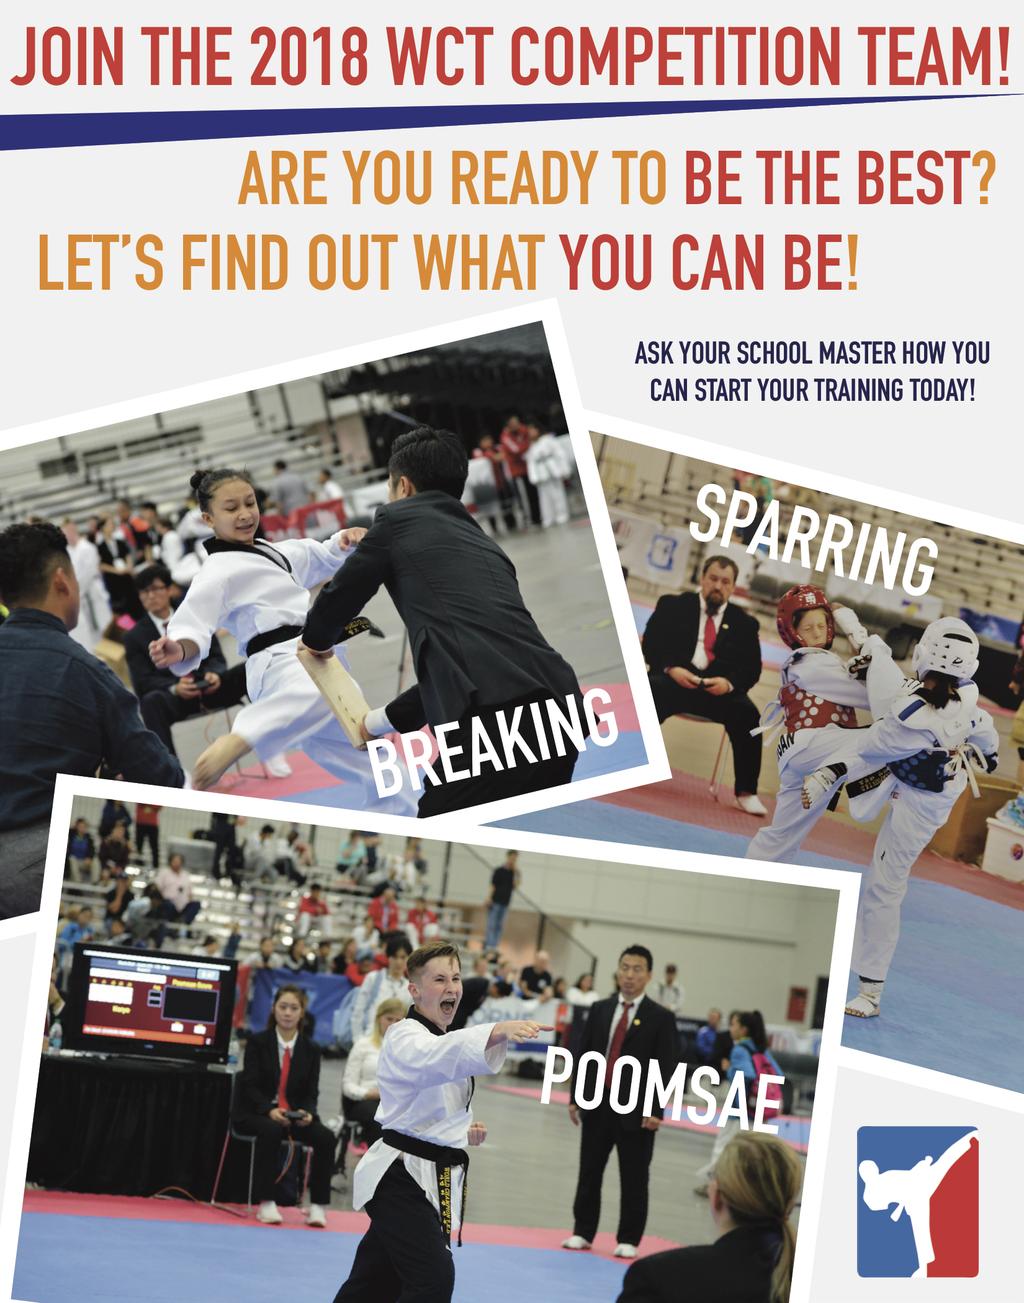 Freestyle Poomsae (Exhibition Event) Freestyle Poomsae will be an exhibition event where all participants will be awarded a medal.